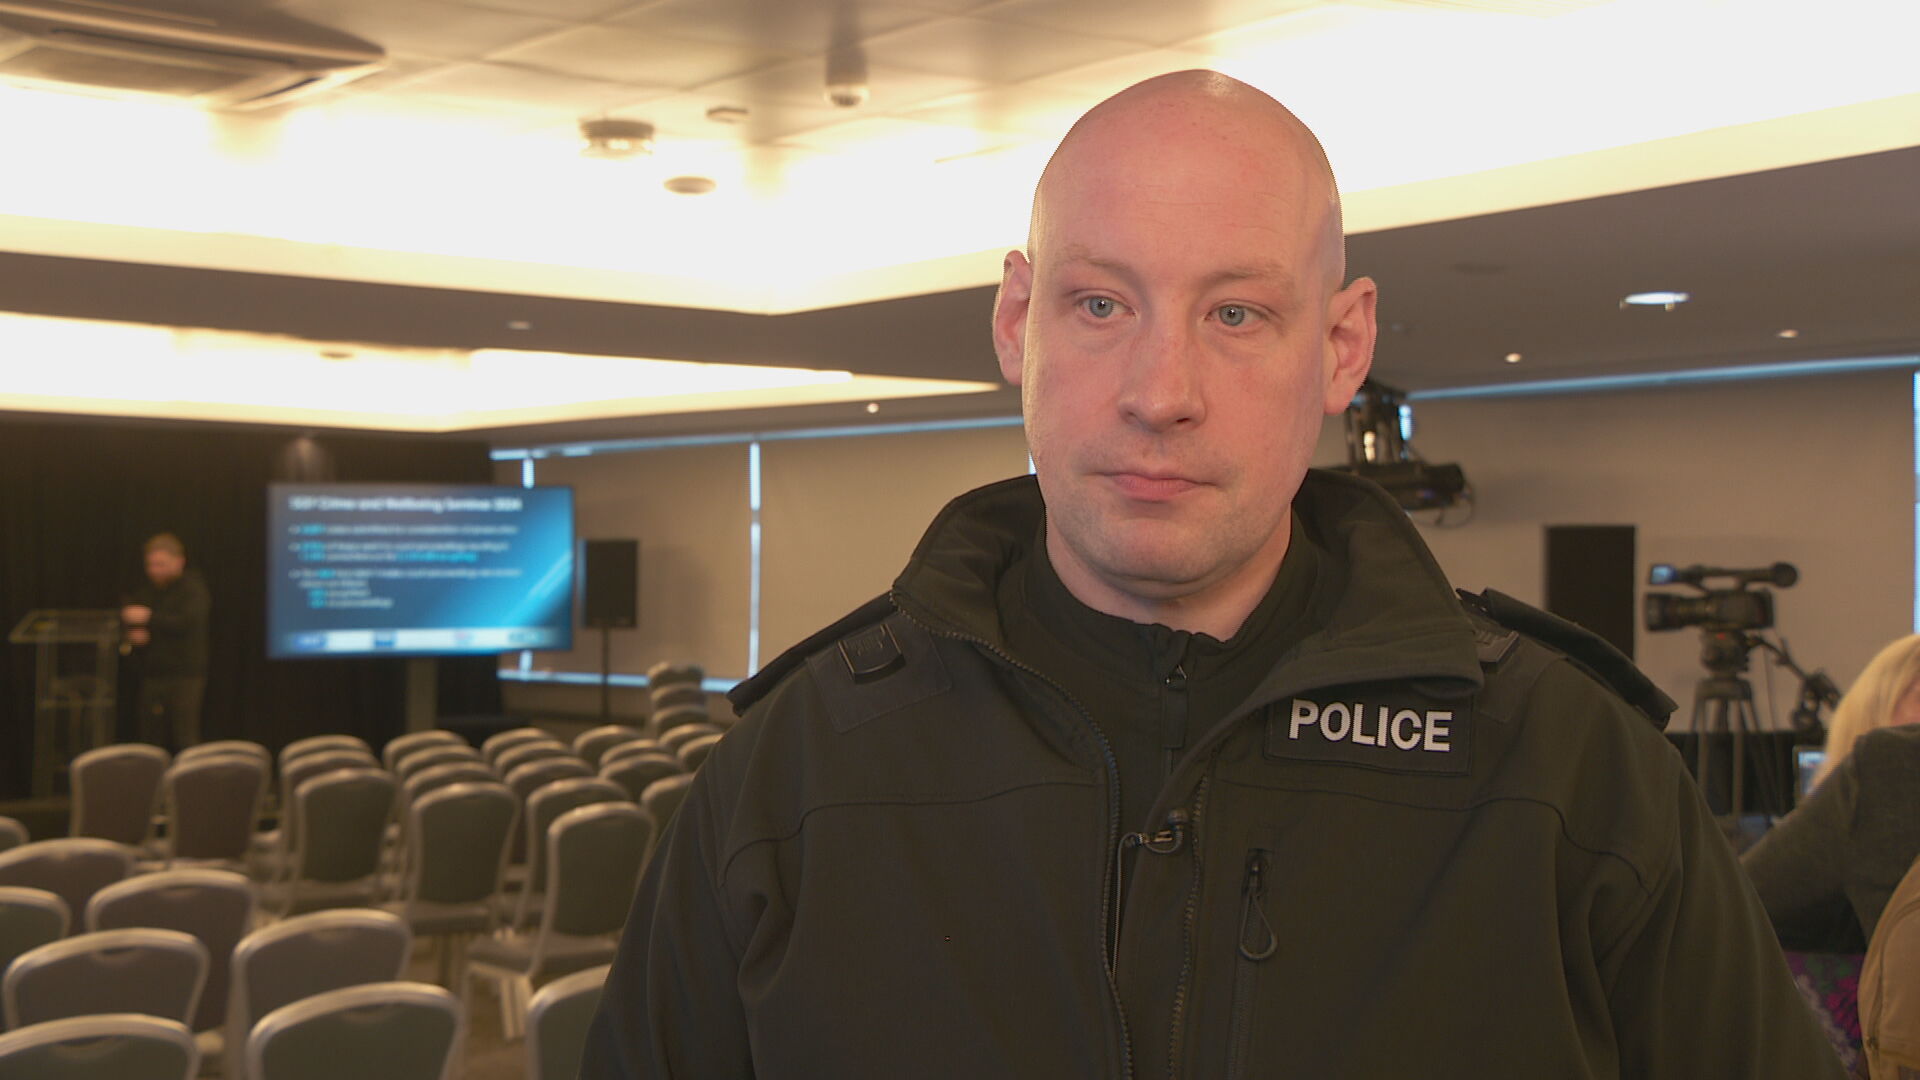 Assistant chief constable Tim Mairs said staff should be able to feel safe at their workplace.